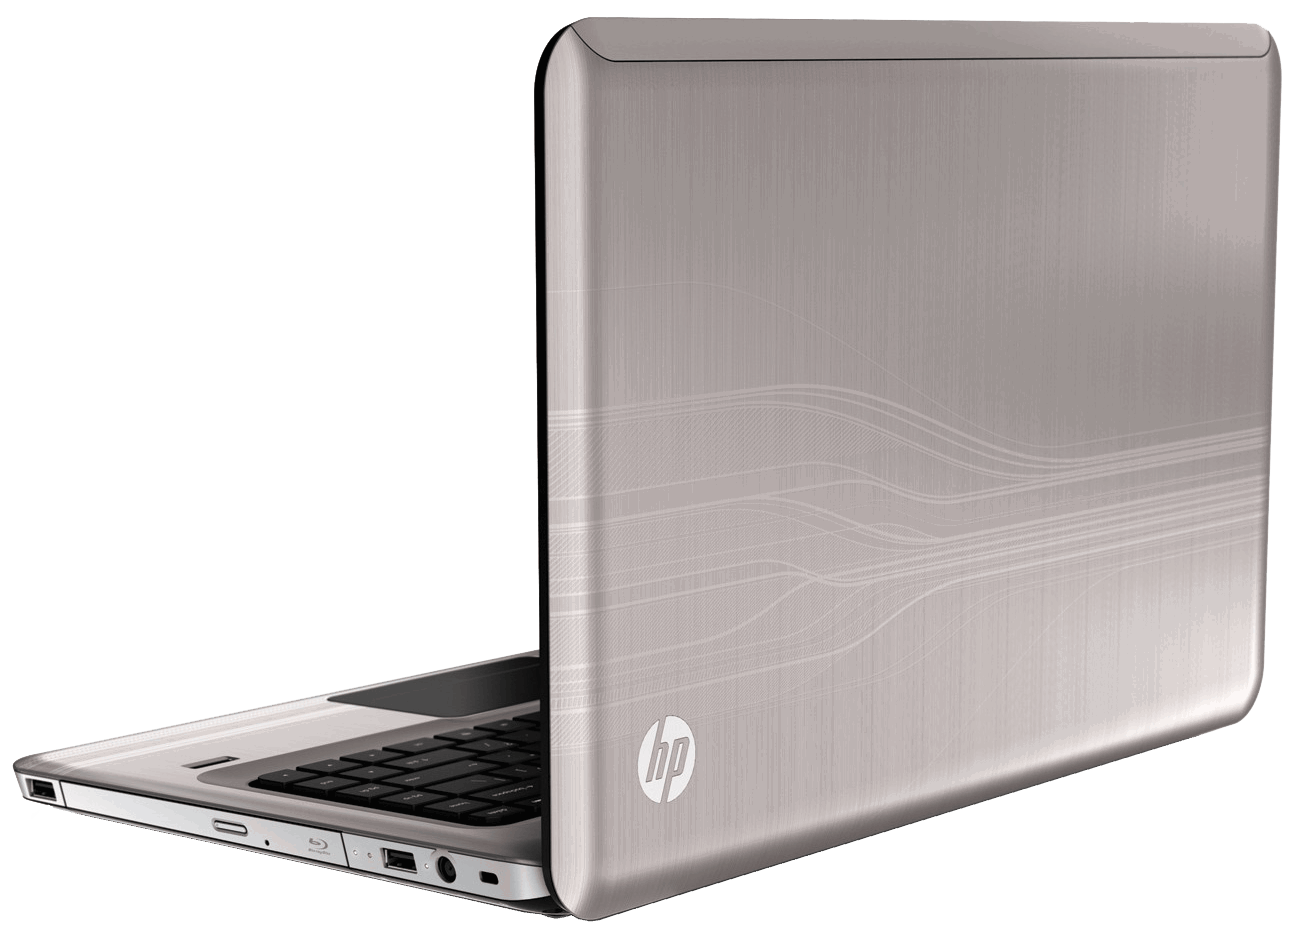 Laptop Notebook PNG Image